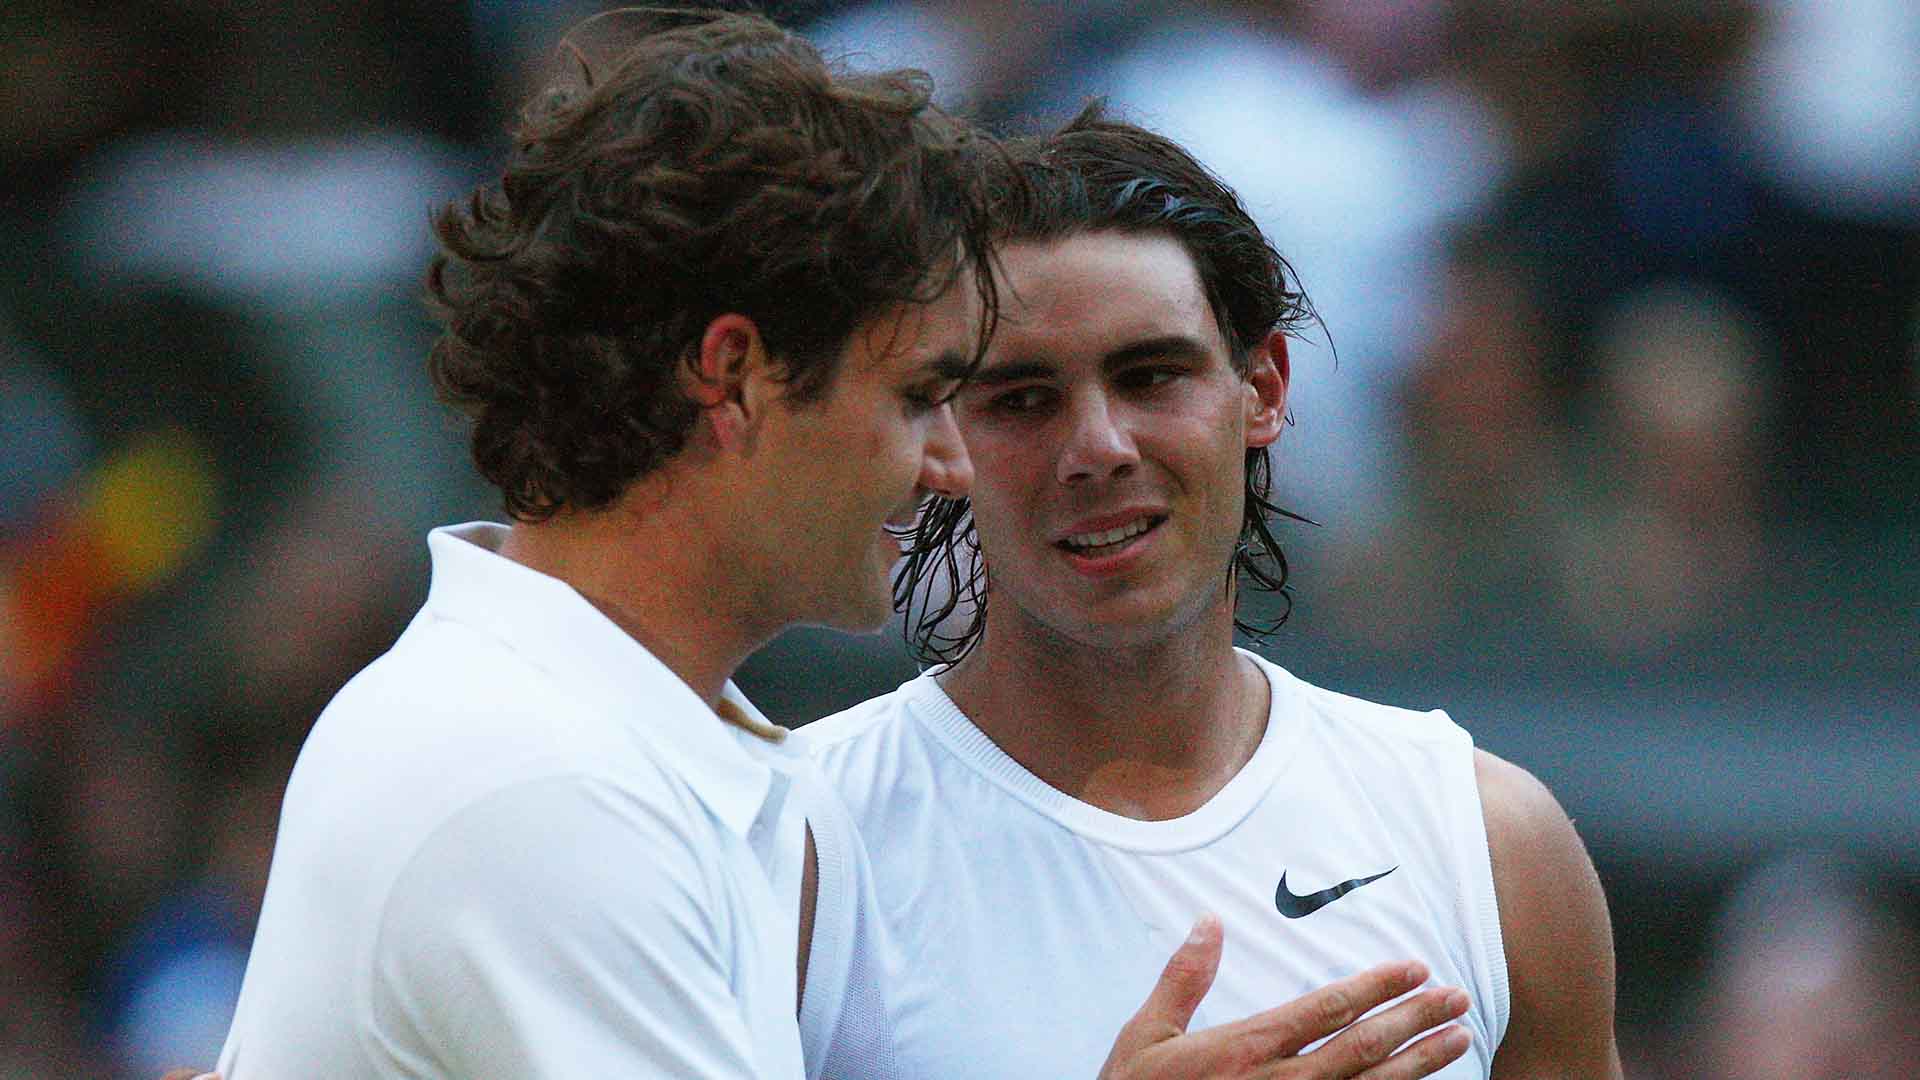 <a href='https://www.atptour.com/en/players/roger-federer/f324/overview'>Roger Federer</a> and <a href='https://www.atptour.com/en/players/rafael-nadal/n409/overview'>Rafael Nadal</a> share a moment at the net following the conclusion of the 2008 <a href='https://www.atptour.com/en/tournaments/wimbledon/540/overview'>Wimbledon</a> final.